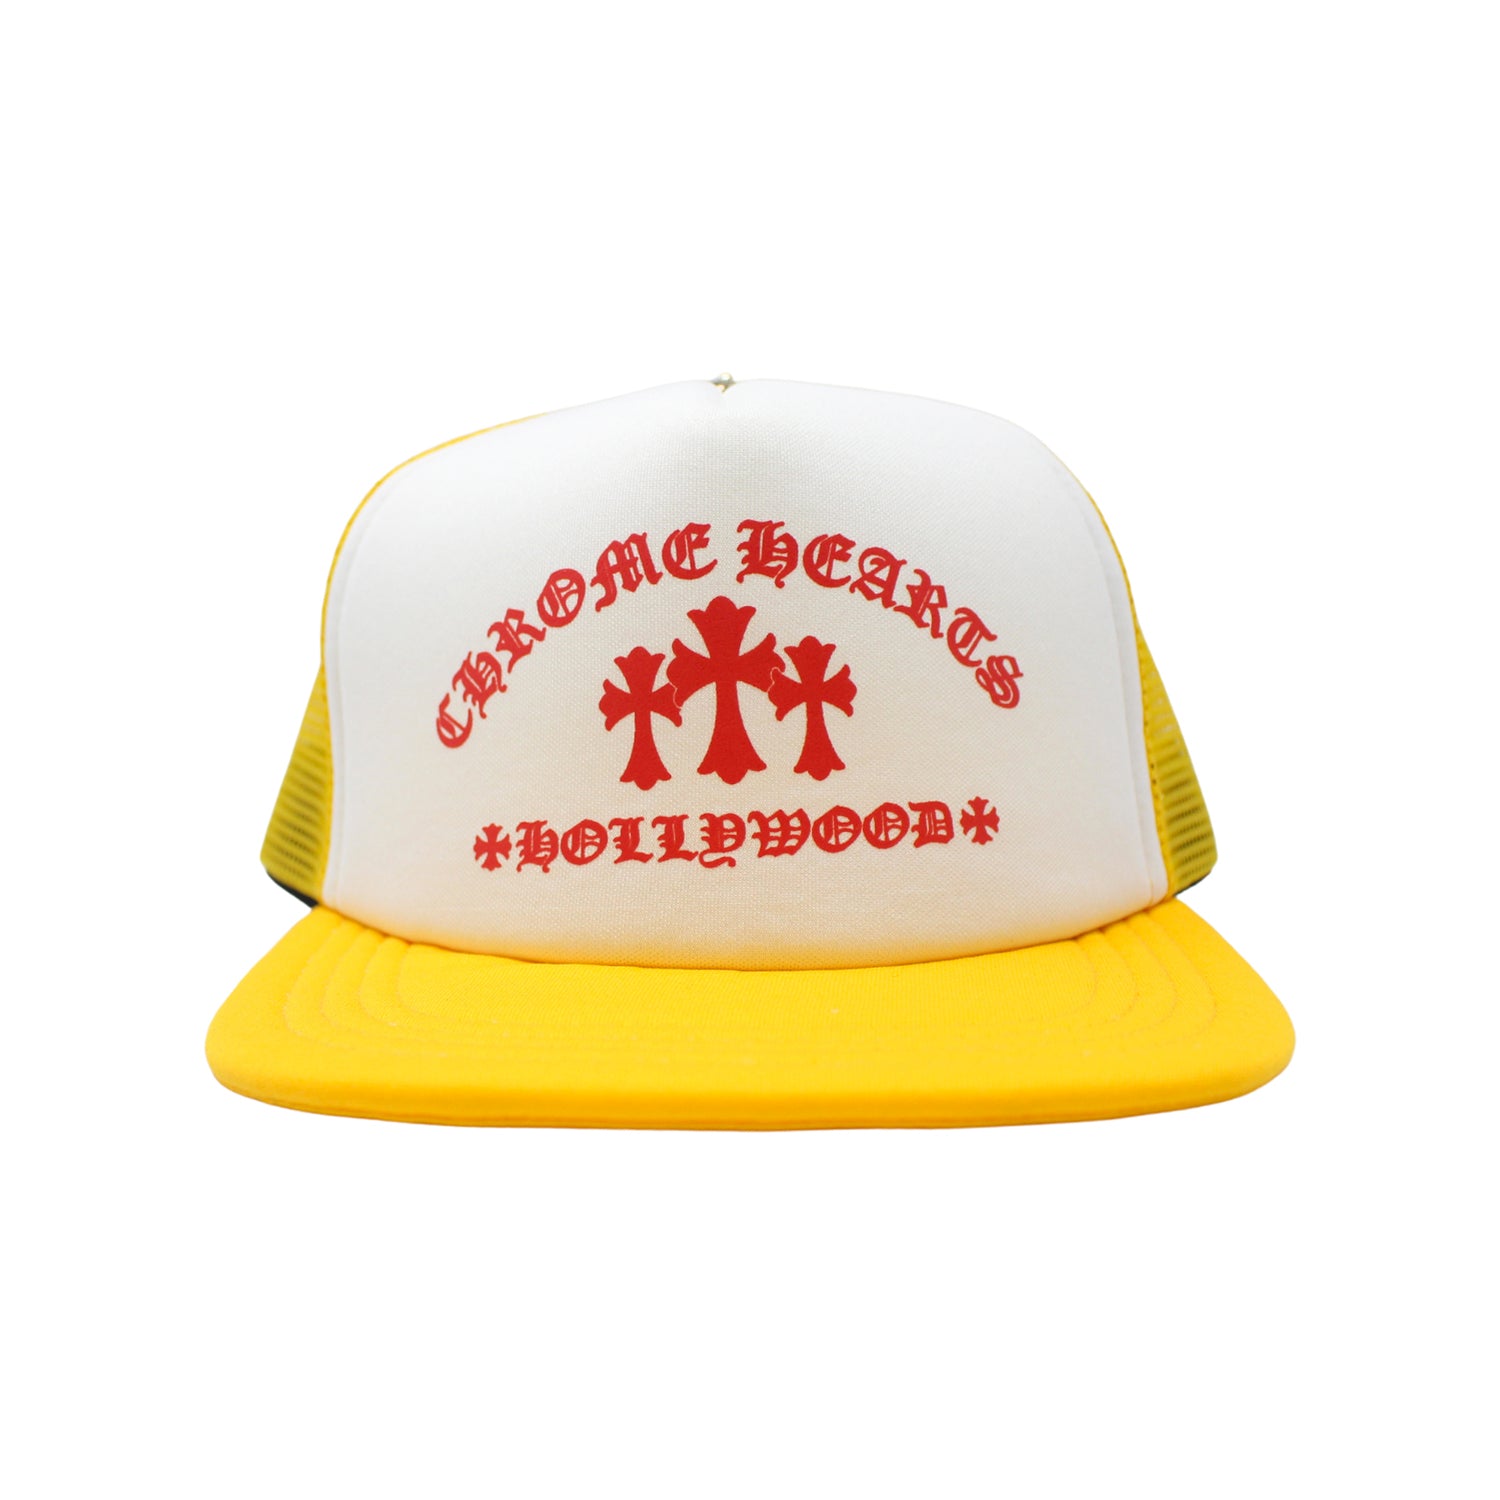 Chrome Hearts King Taco Trucker Hat Yellow/White/Red